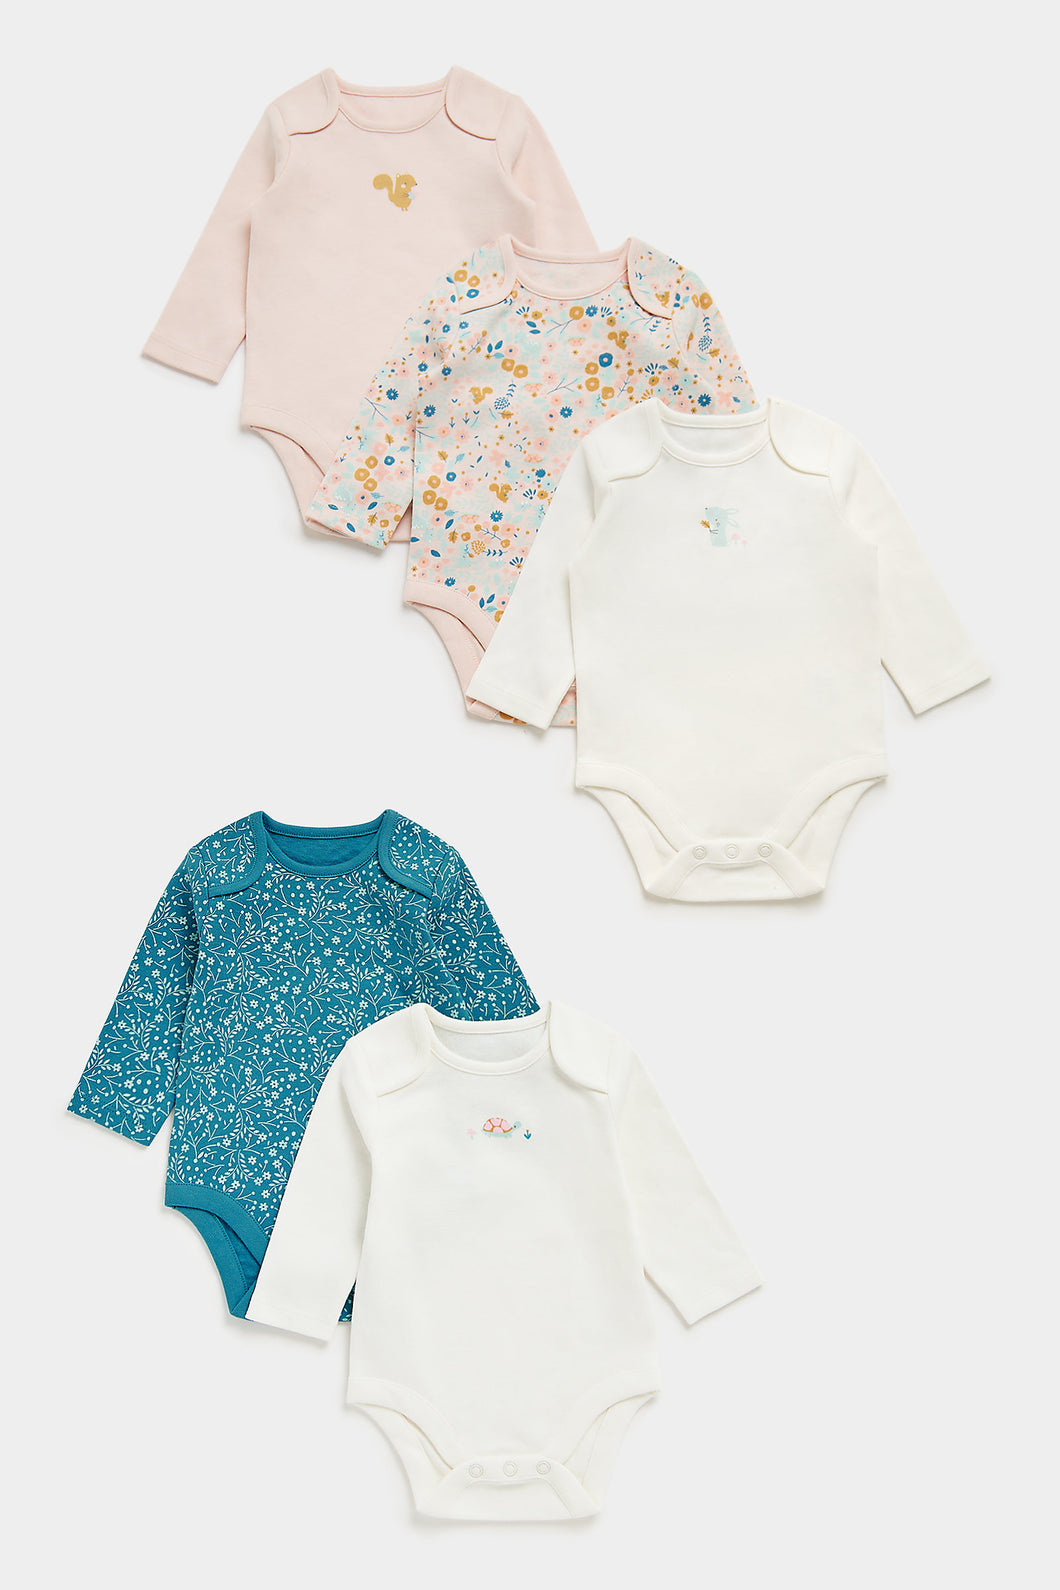 Mothercare Floral Forest Long-Sleeved Baby Bodysuits - 5 Pack